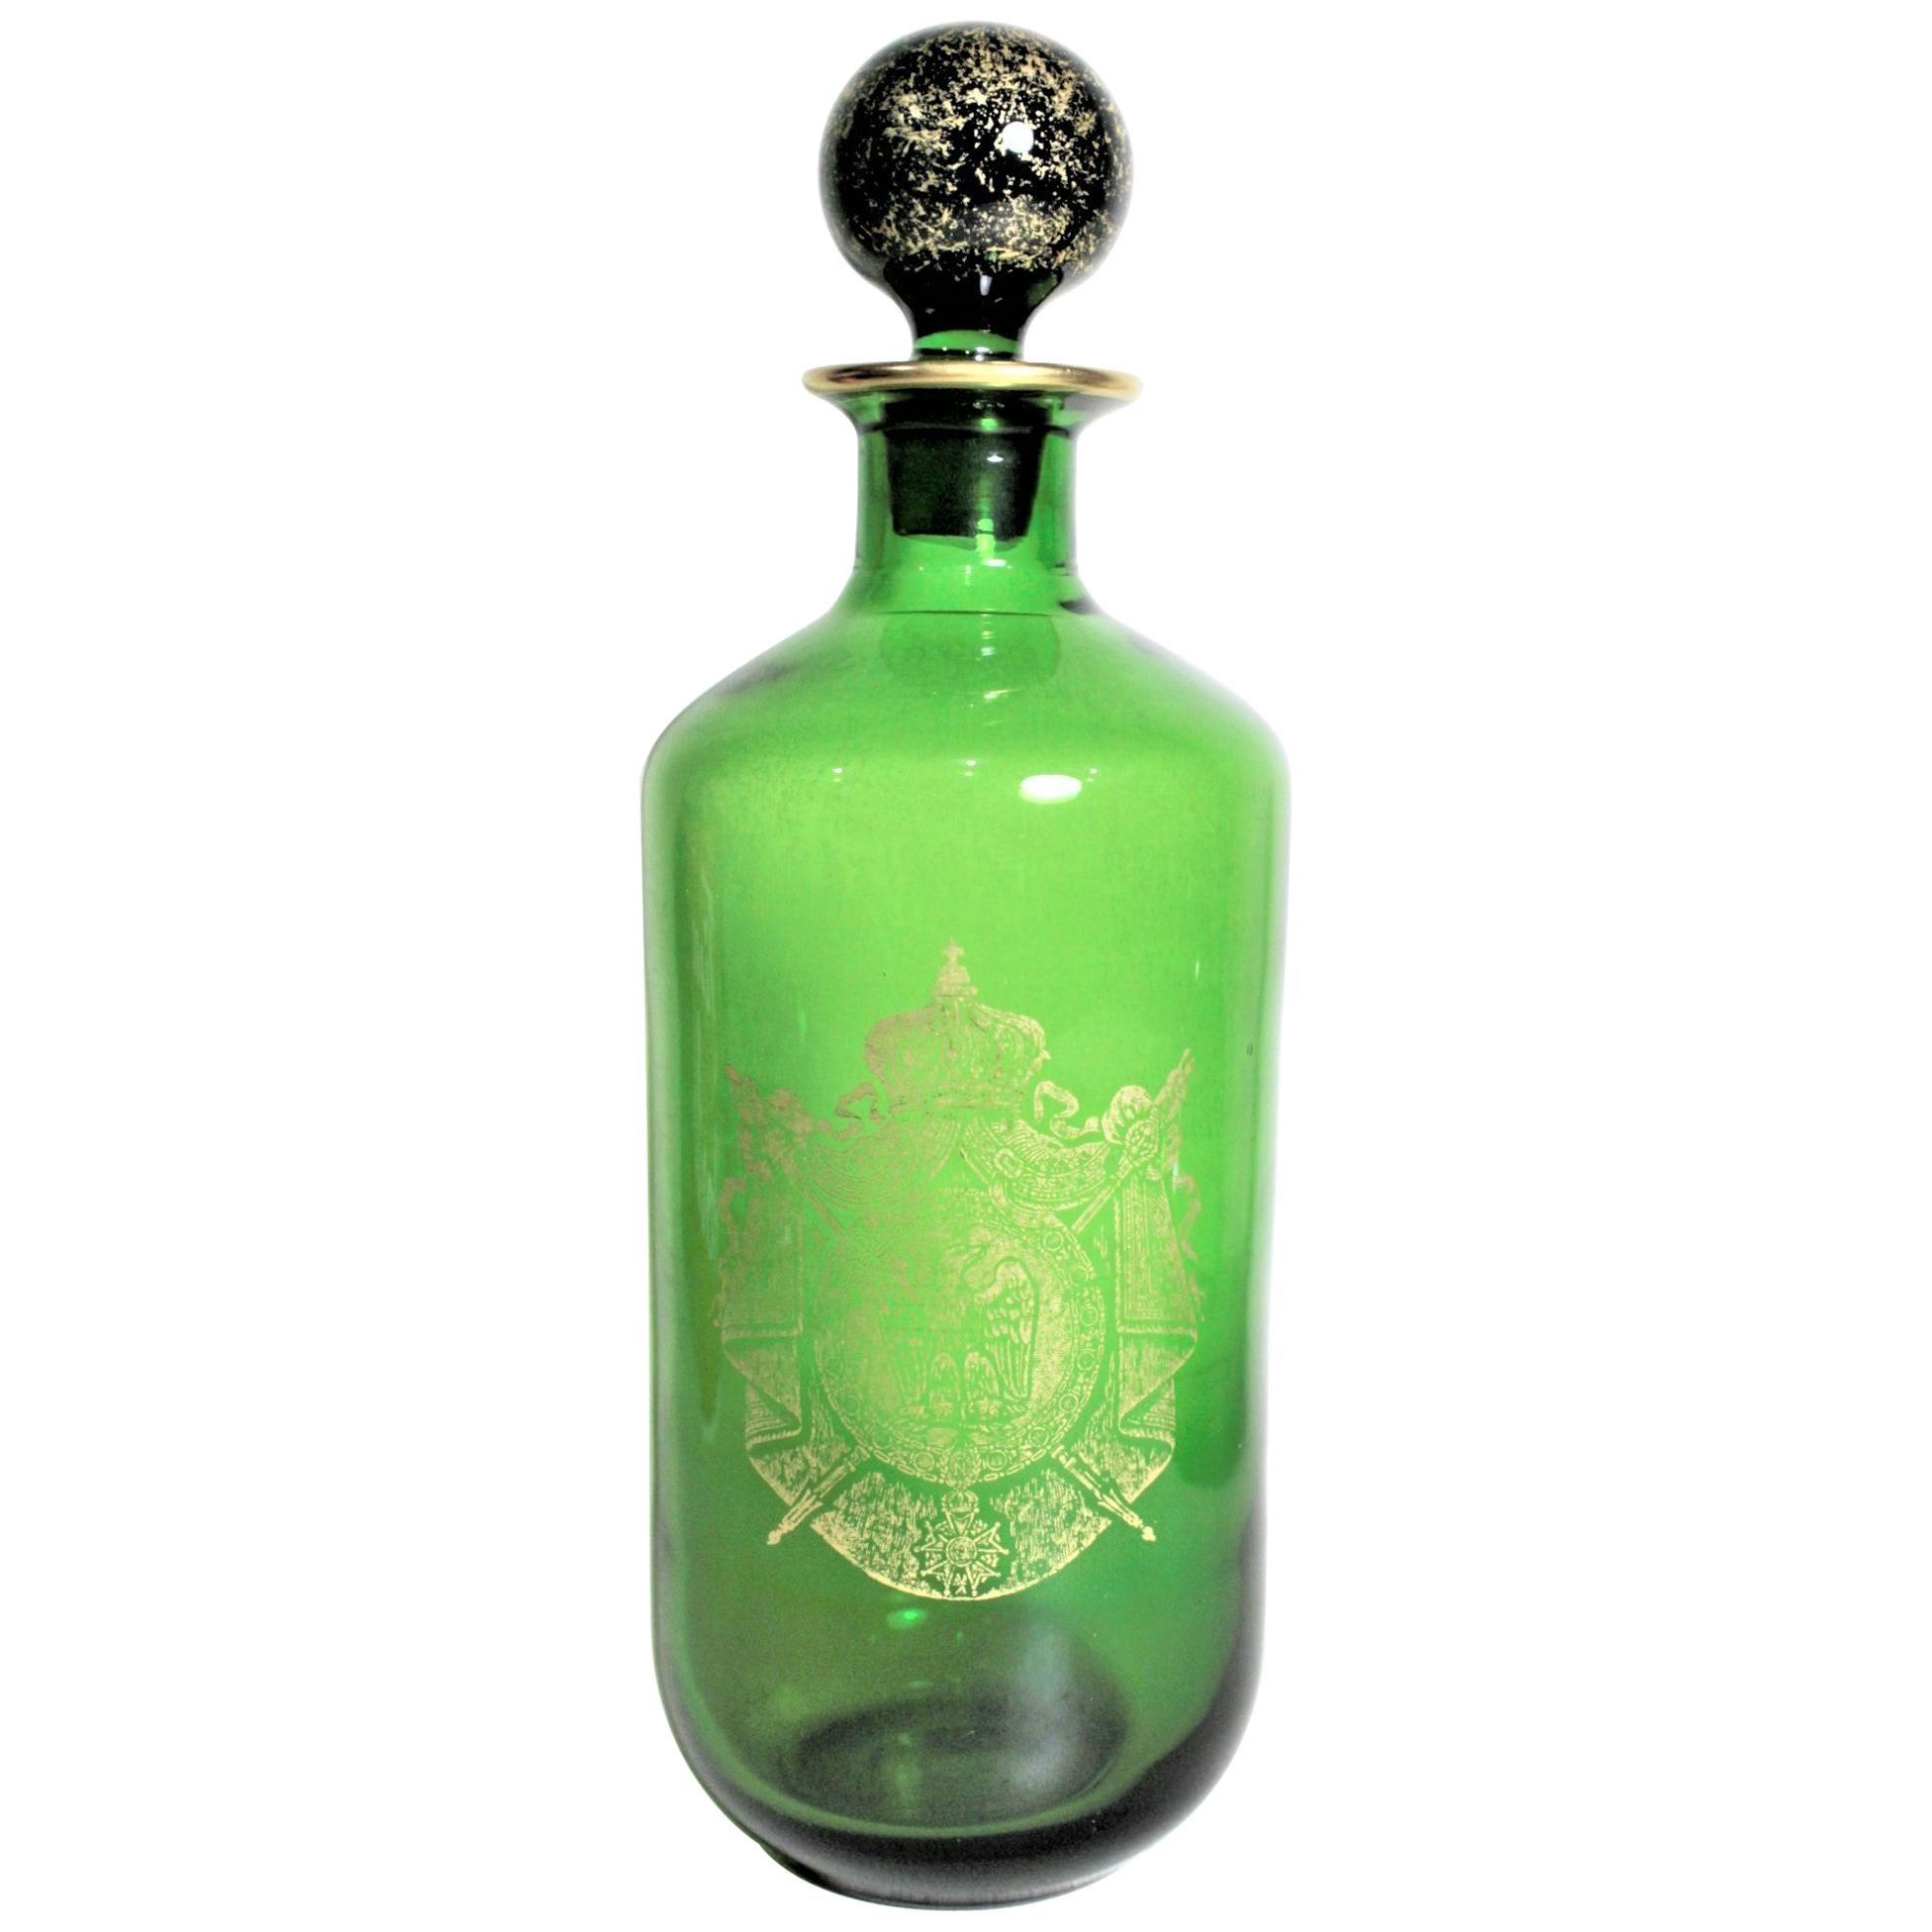 Antique Green Napoleonic Styled French Bottle Decanter with a Large Gilt Crest